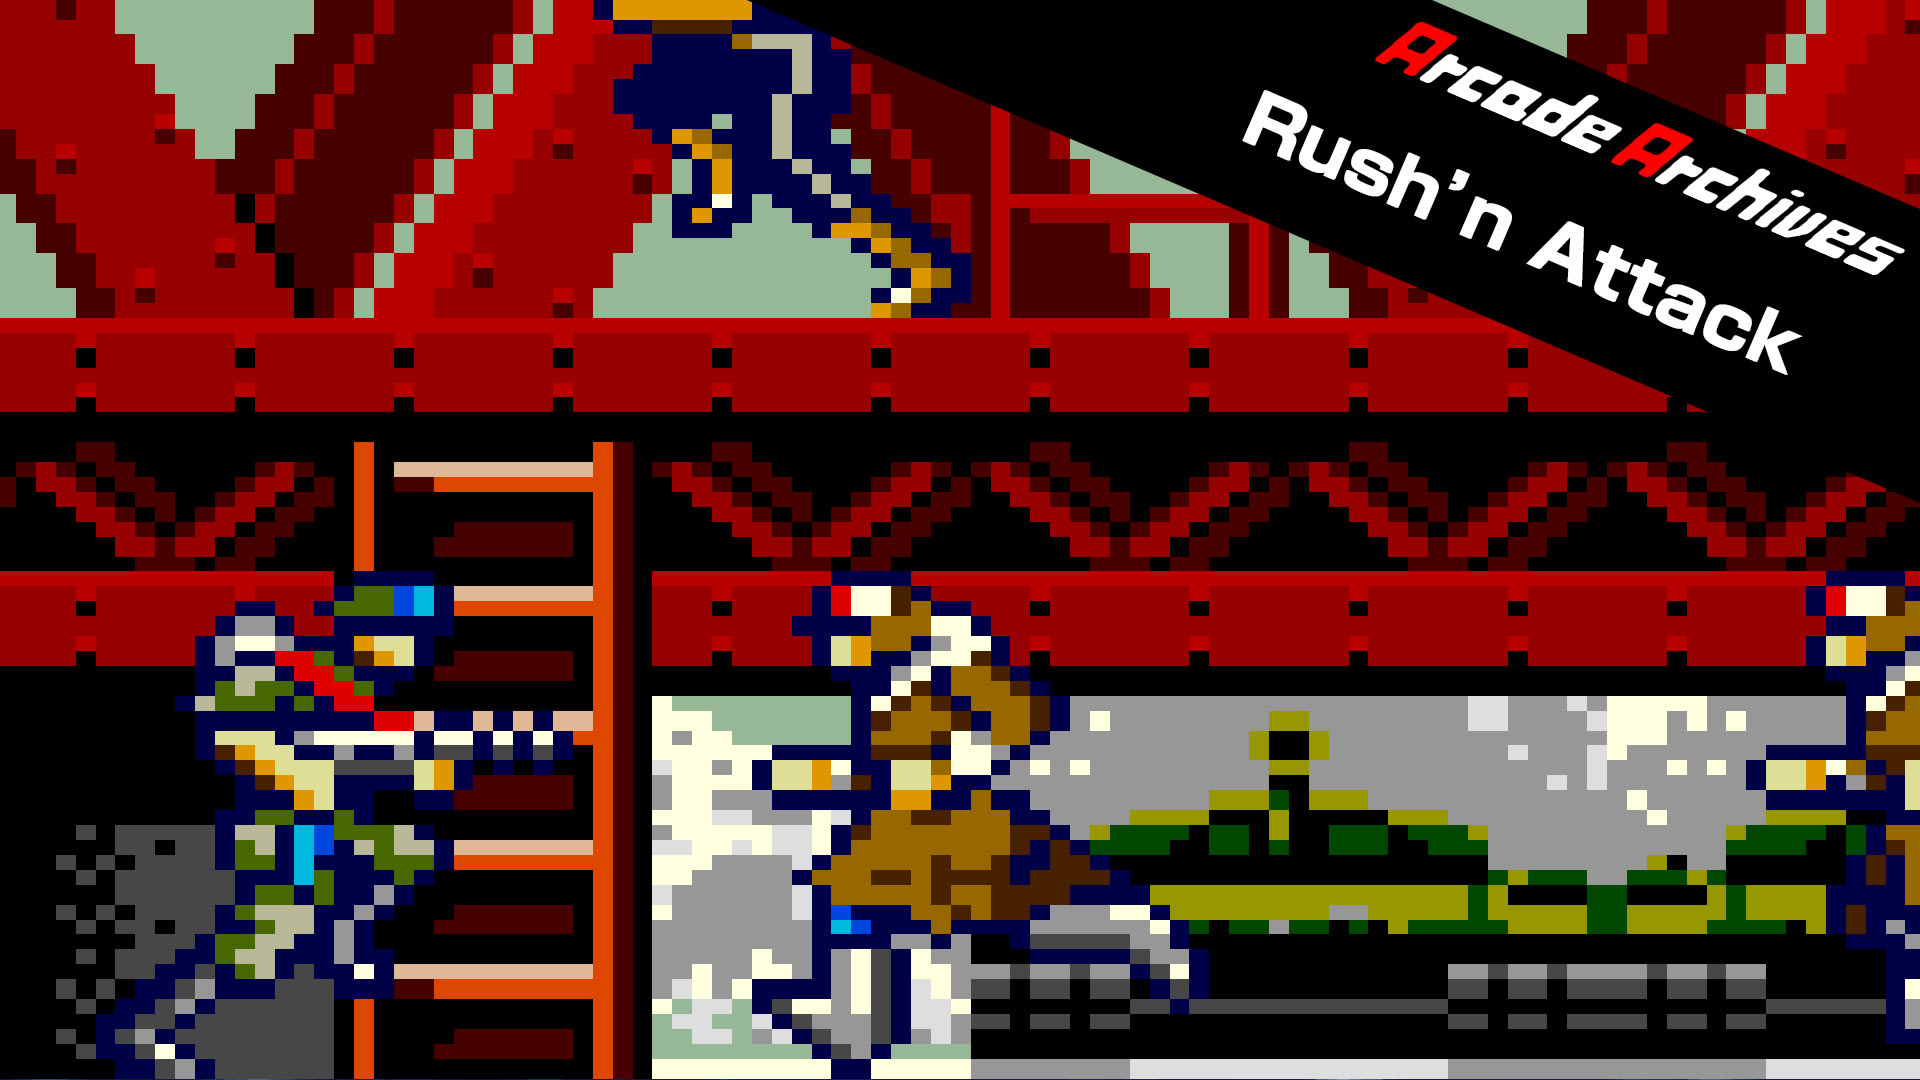 Arcade Archives Rush'n Attack